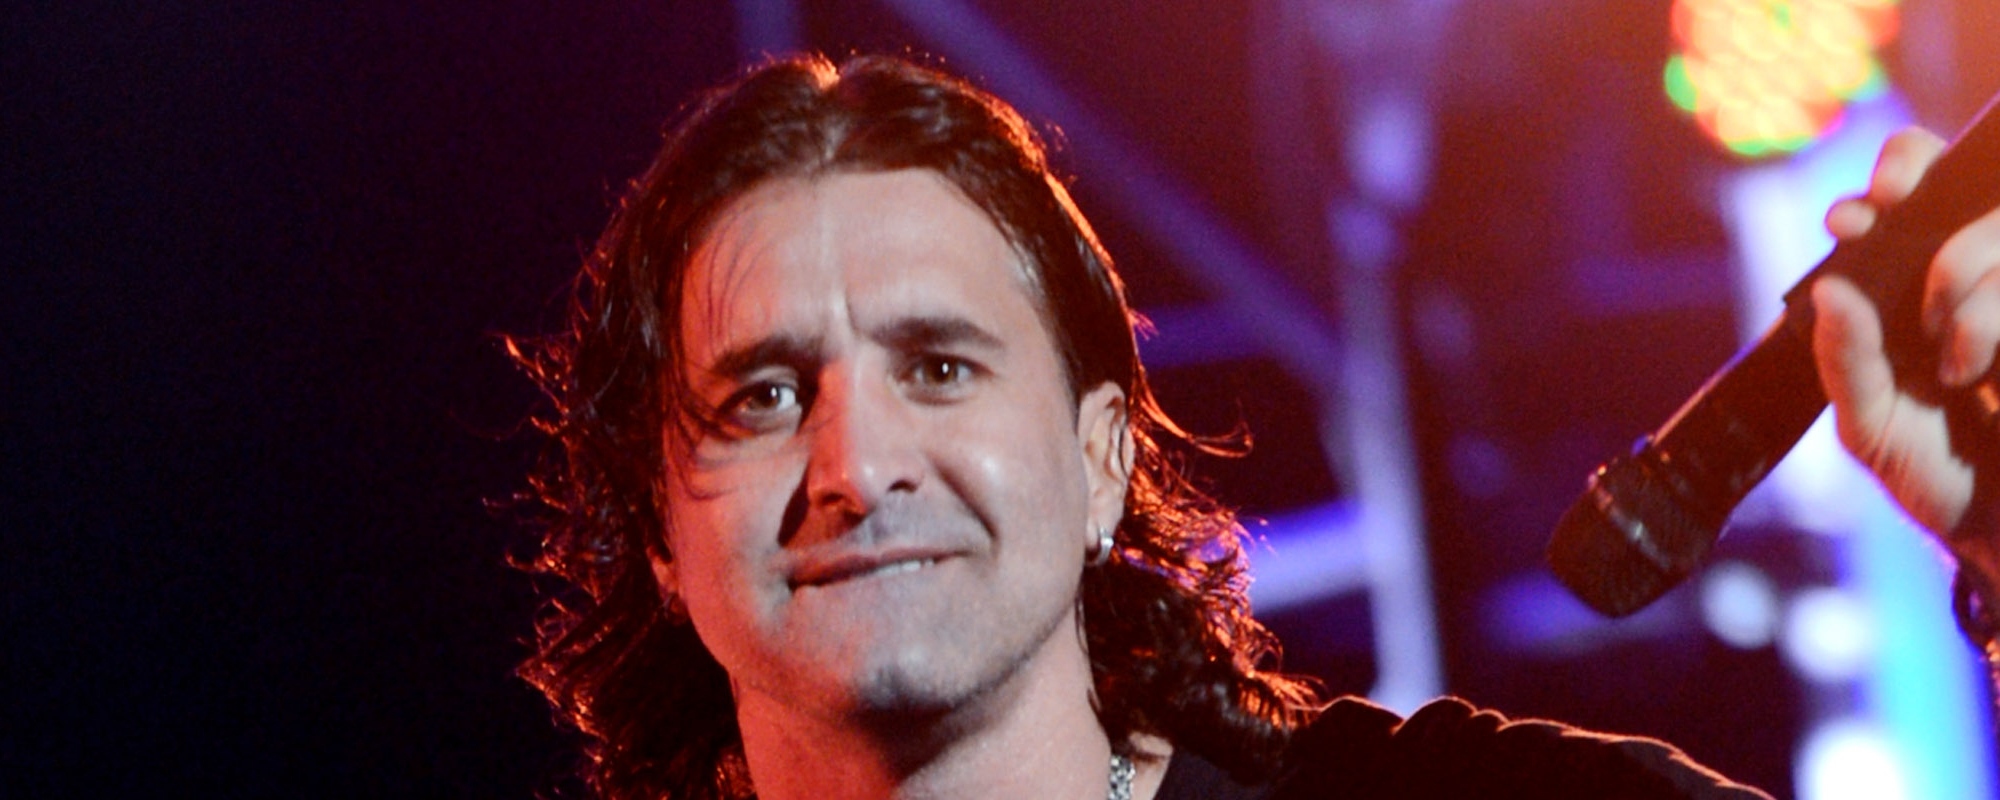 Creed’s Scott Stapp Discusses New Album ‘Higher Power’ and Dealing with Mental Illness